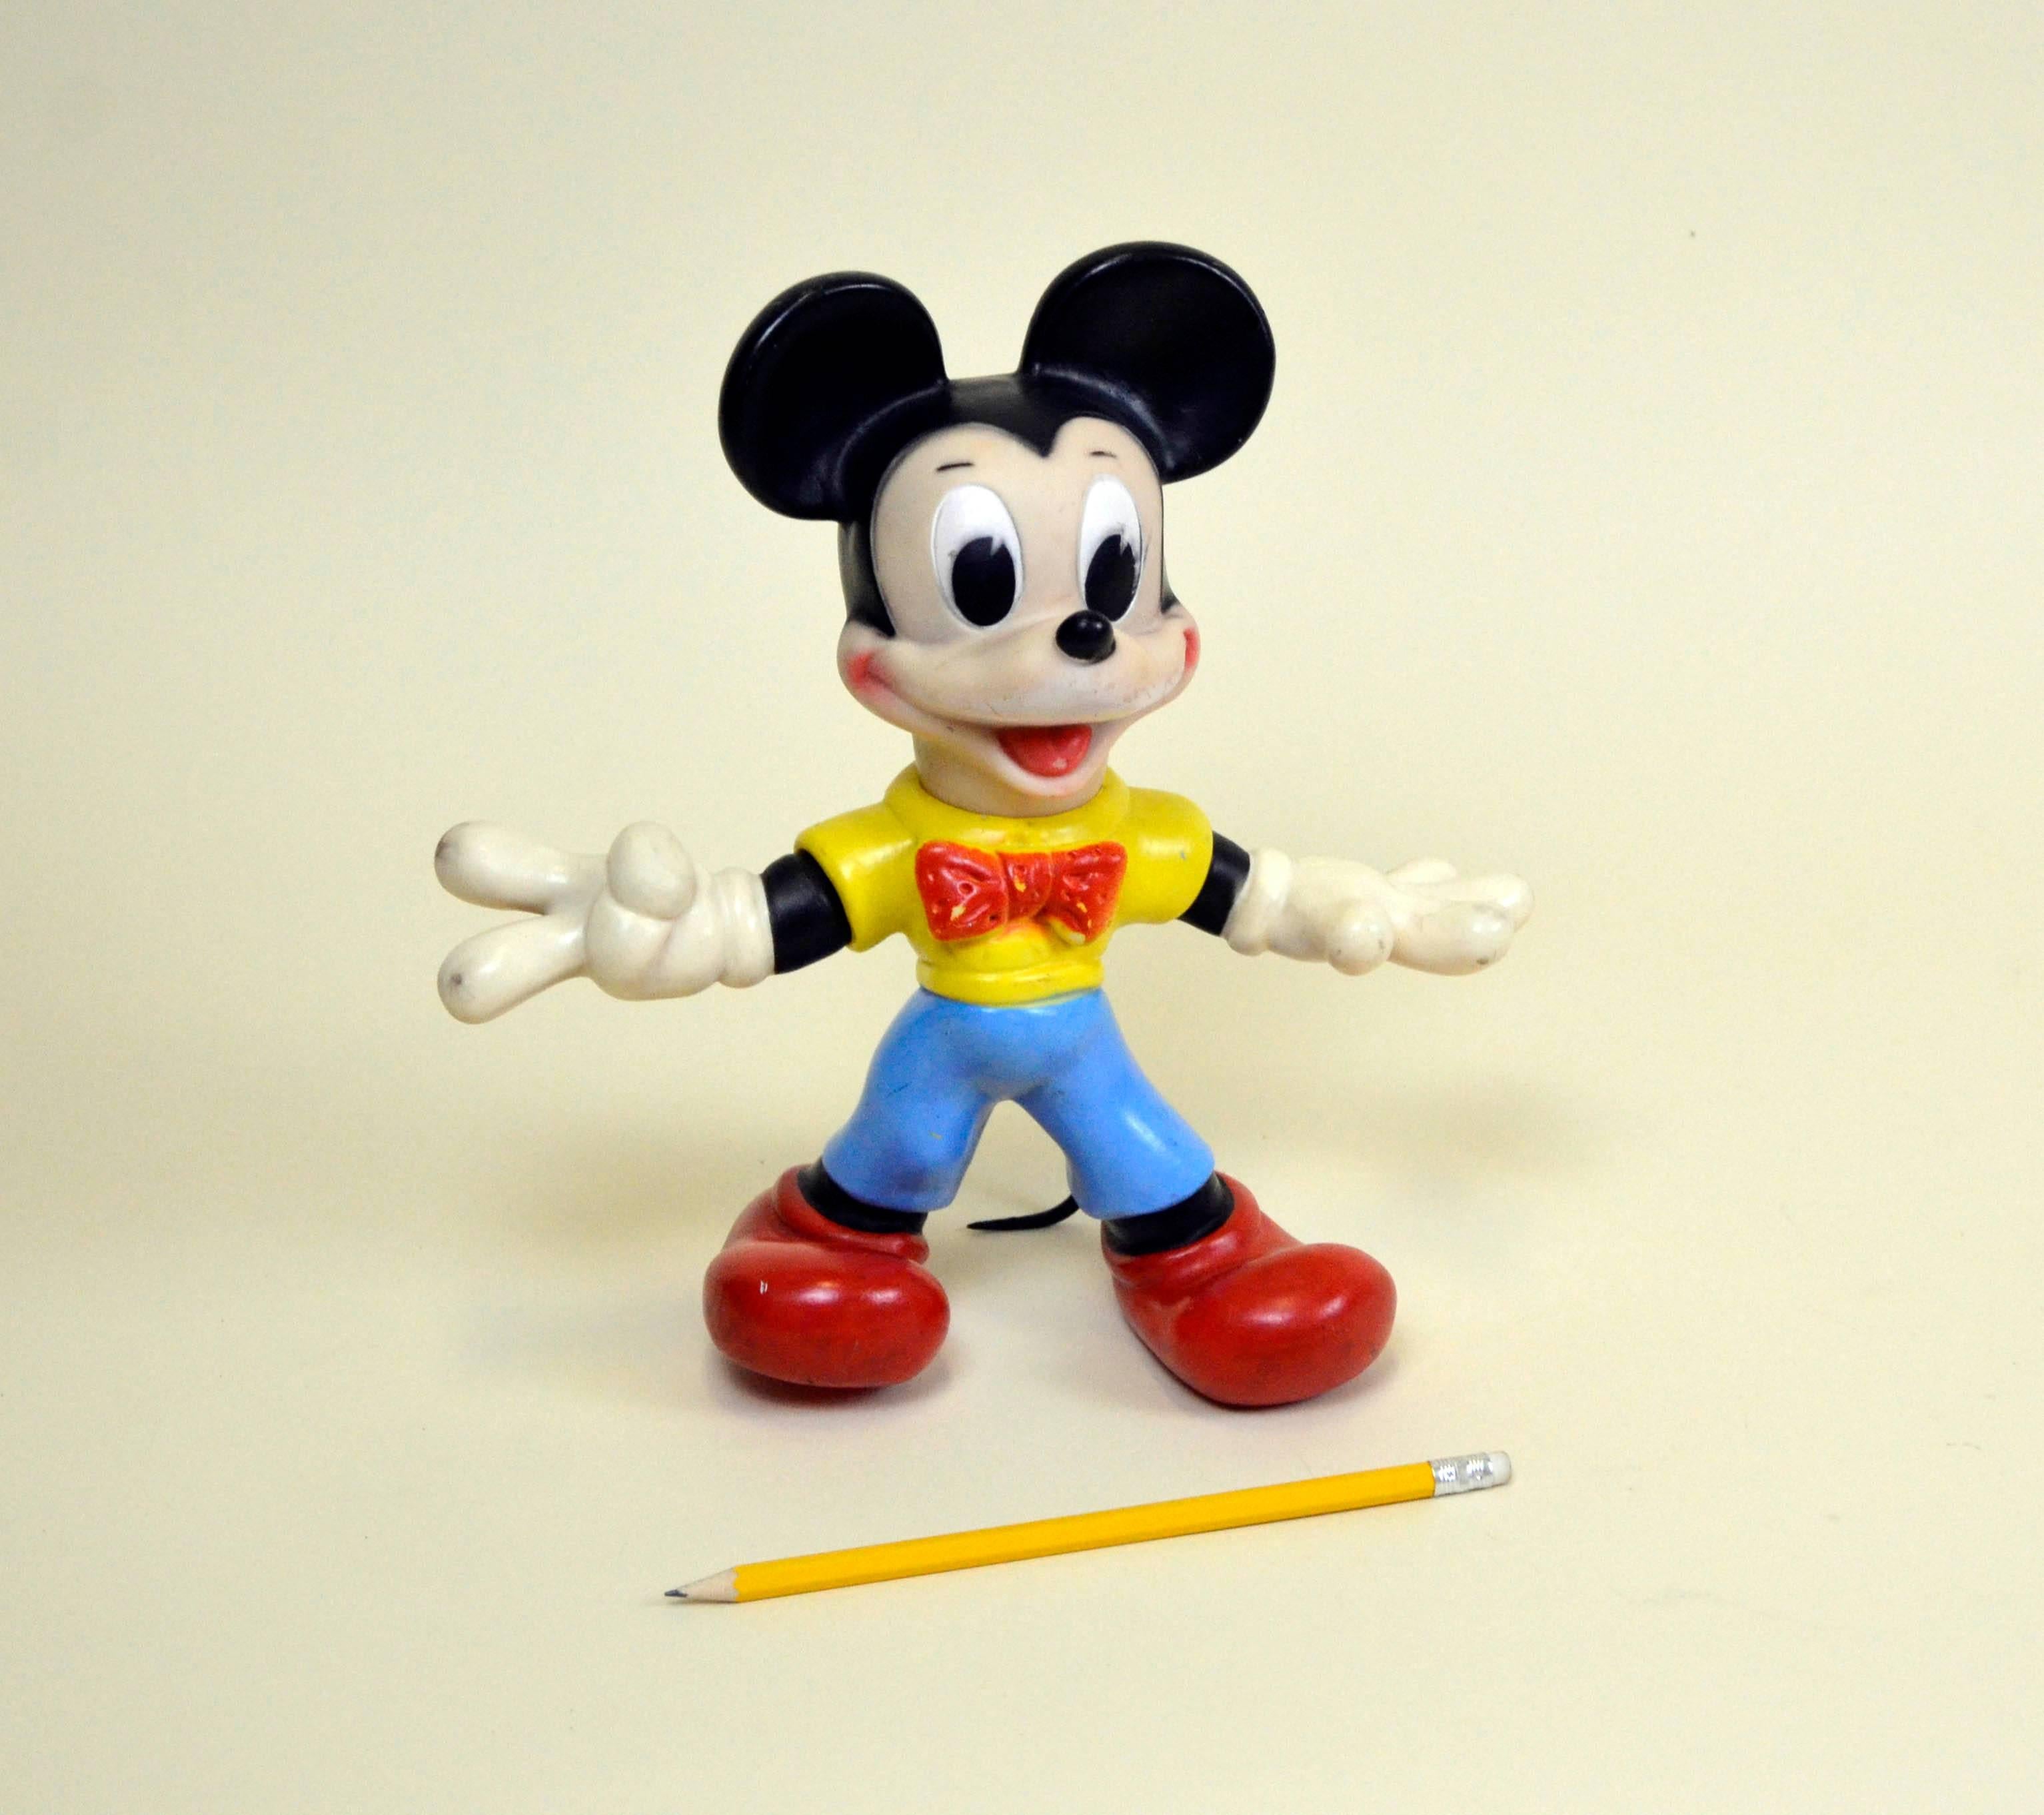 Vintage Mickey Mouse whistling rubber toy with movable arms and tail made by Ledraplastic Italy in the 1970s.

Marked Walt Disney Production on the back and stamped with Ledraplastic elephant symbol.

Collector's note:

In 1962, the company